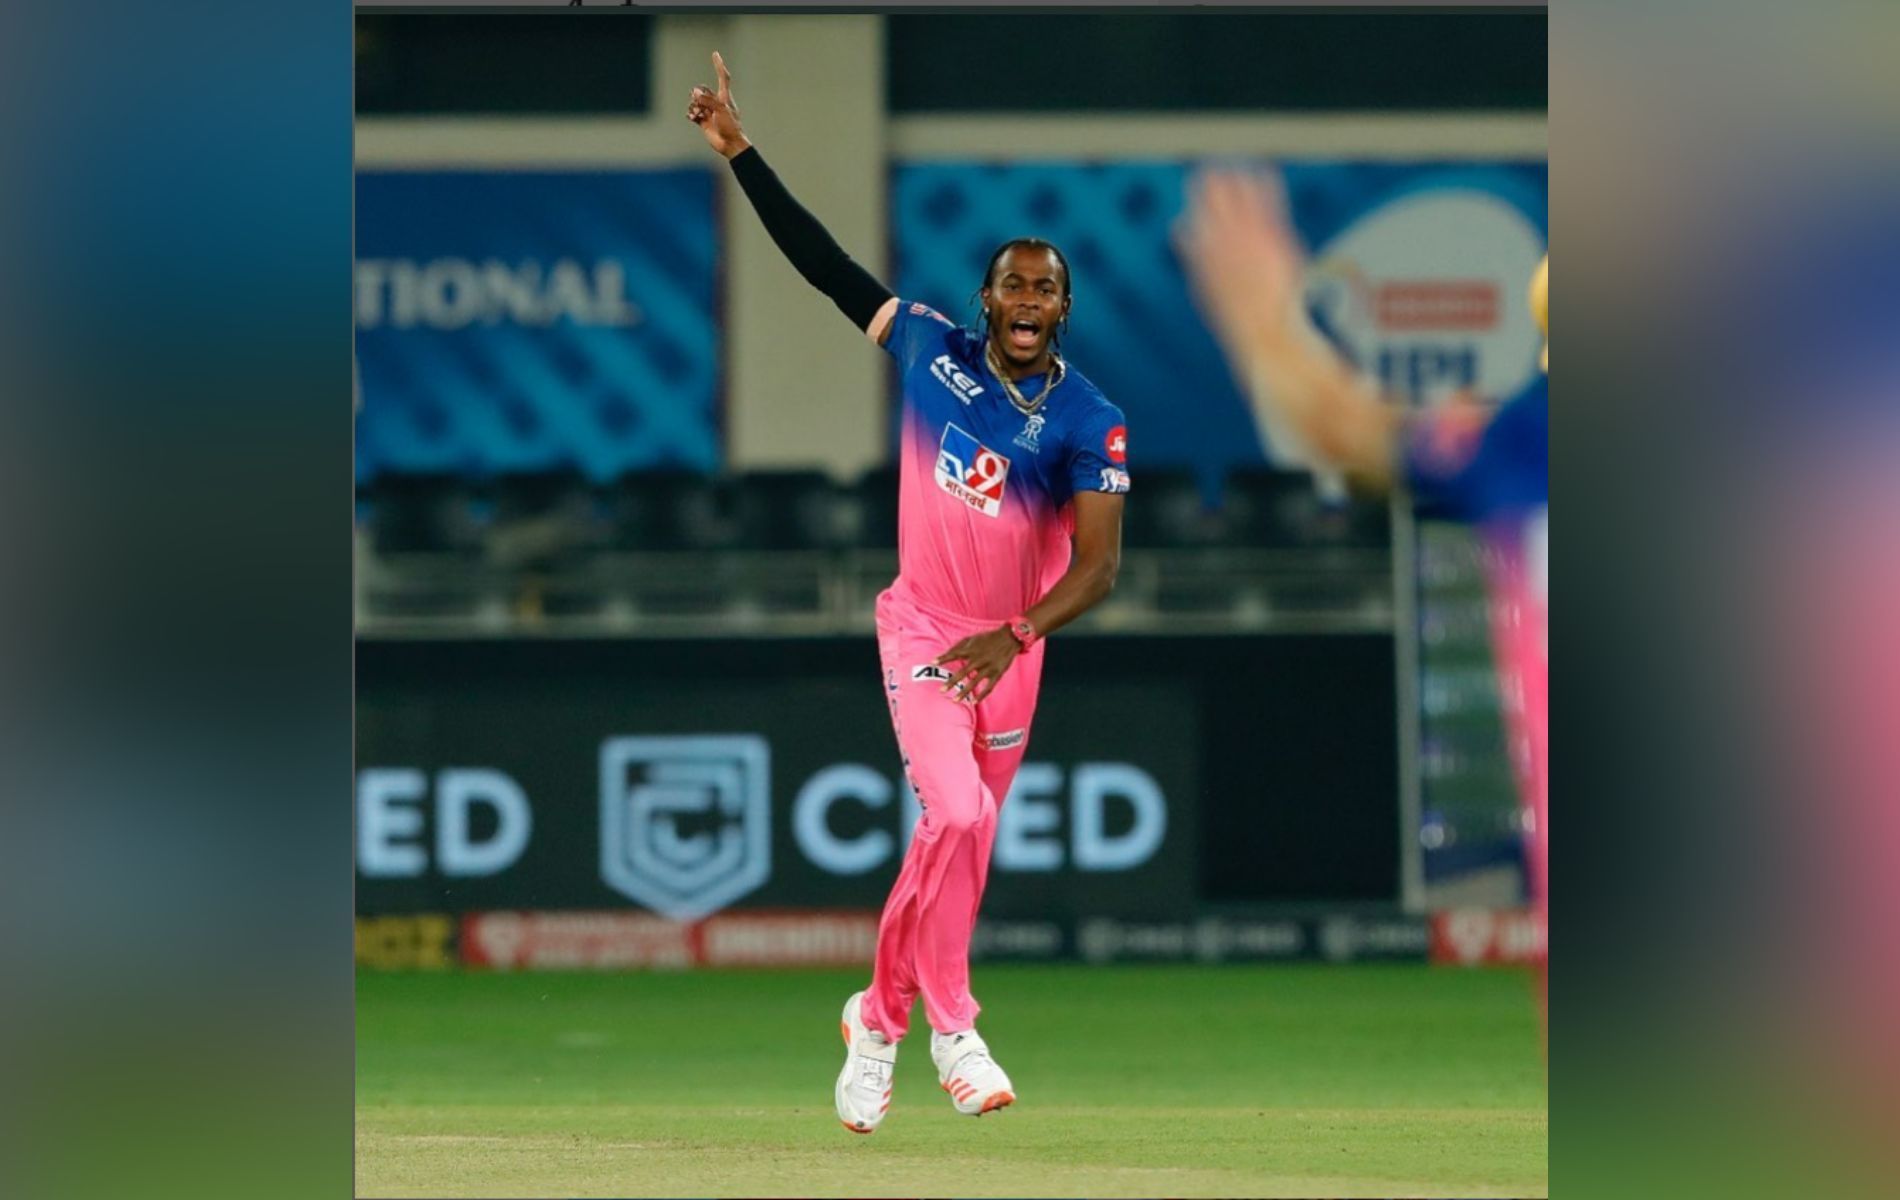 Jofra Archer and Rajasthan Royals parted ways as he was snapped up by Mumbai Indians in the IPL 2022 auction